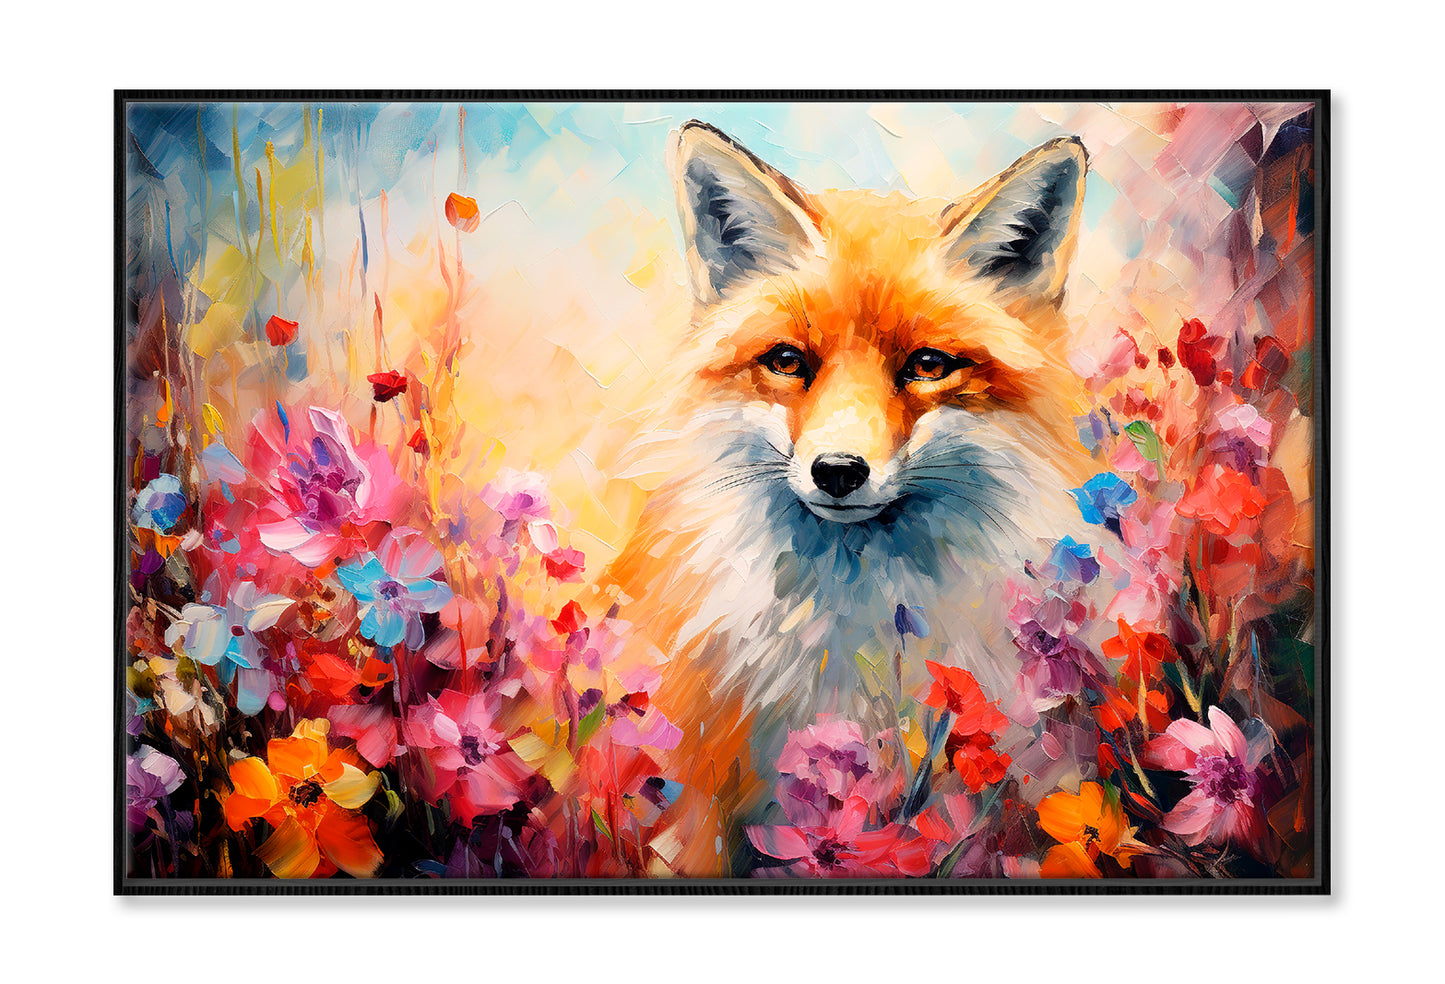 Fox In Flower Blossom Atmosphere Golden Colorful Oil Painting Wall Art Limited Edition High Quality Print Canvas Box Framed Black